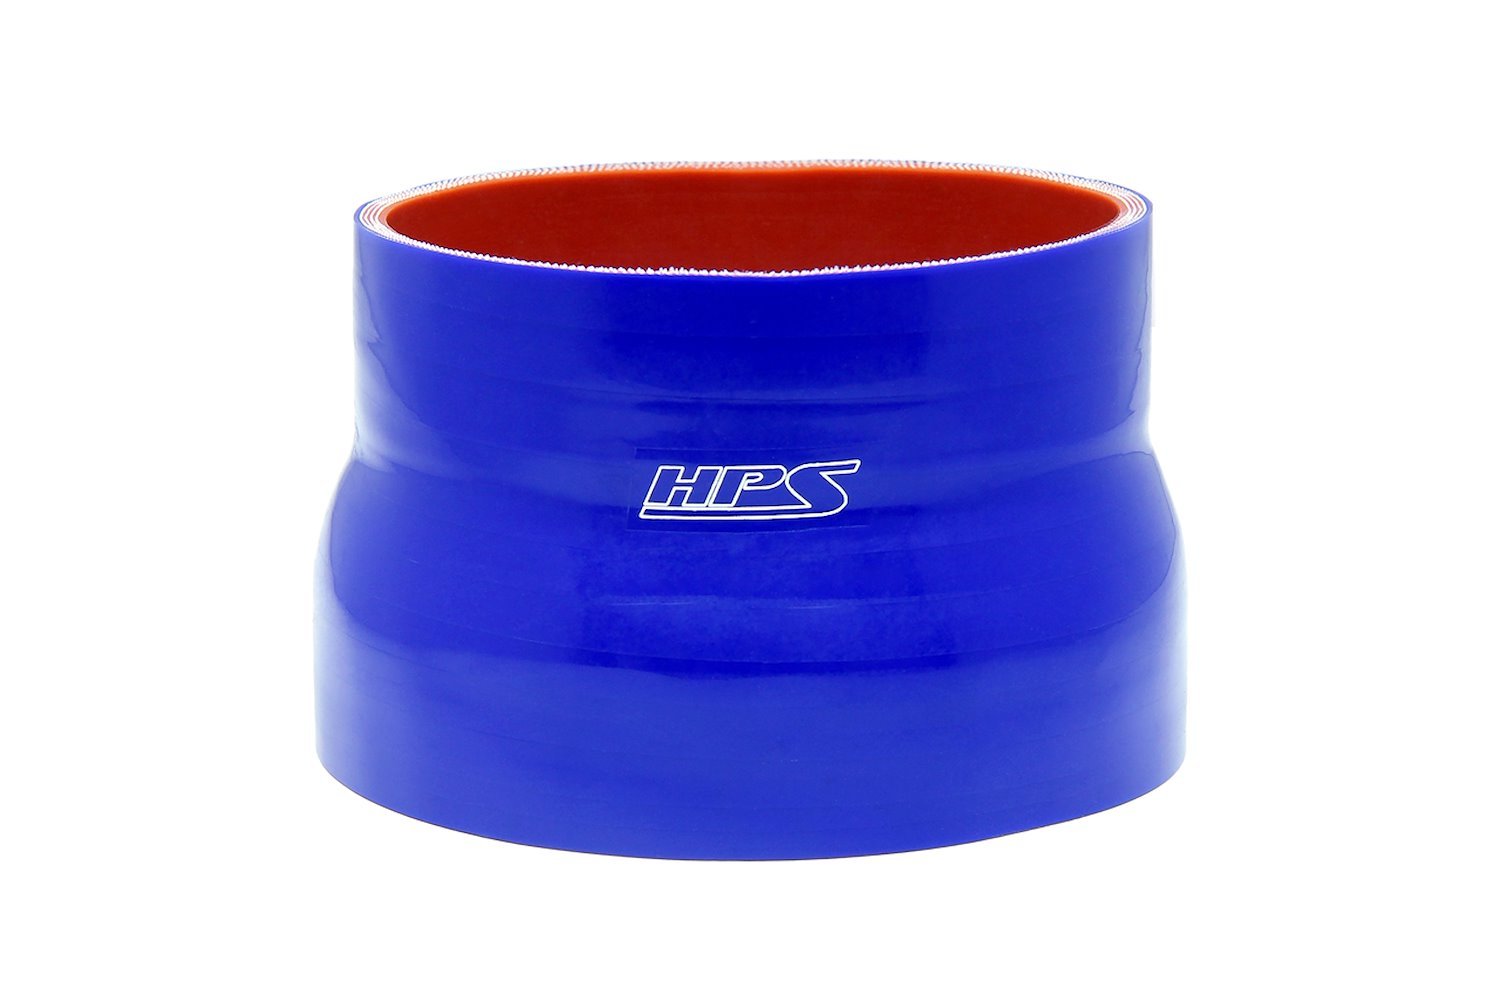 HTSR-375-400-BLUE Silicone Reducer Hose, High-Temp 4-Ply Reinforced, 3-3/4 in. - 4 in. ID, 3 in. Long, Blue